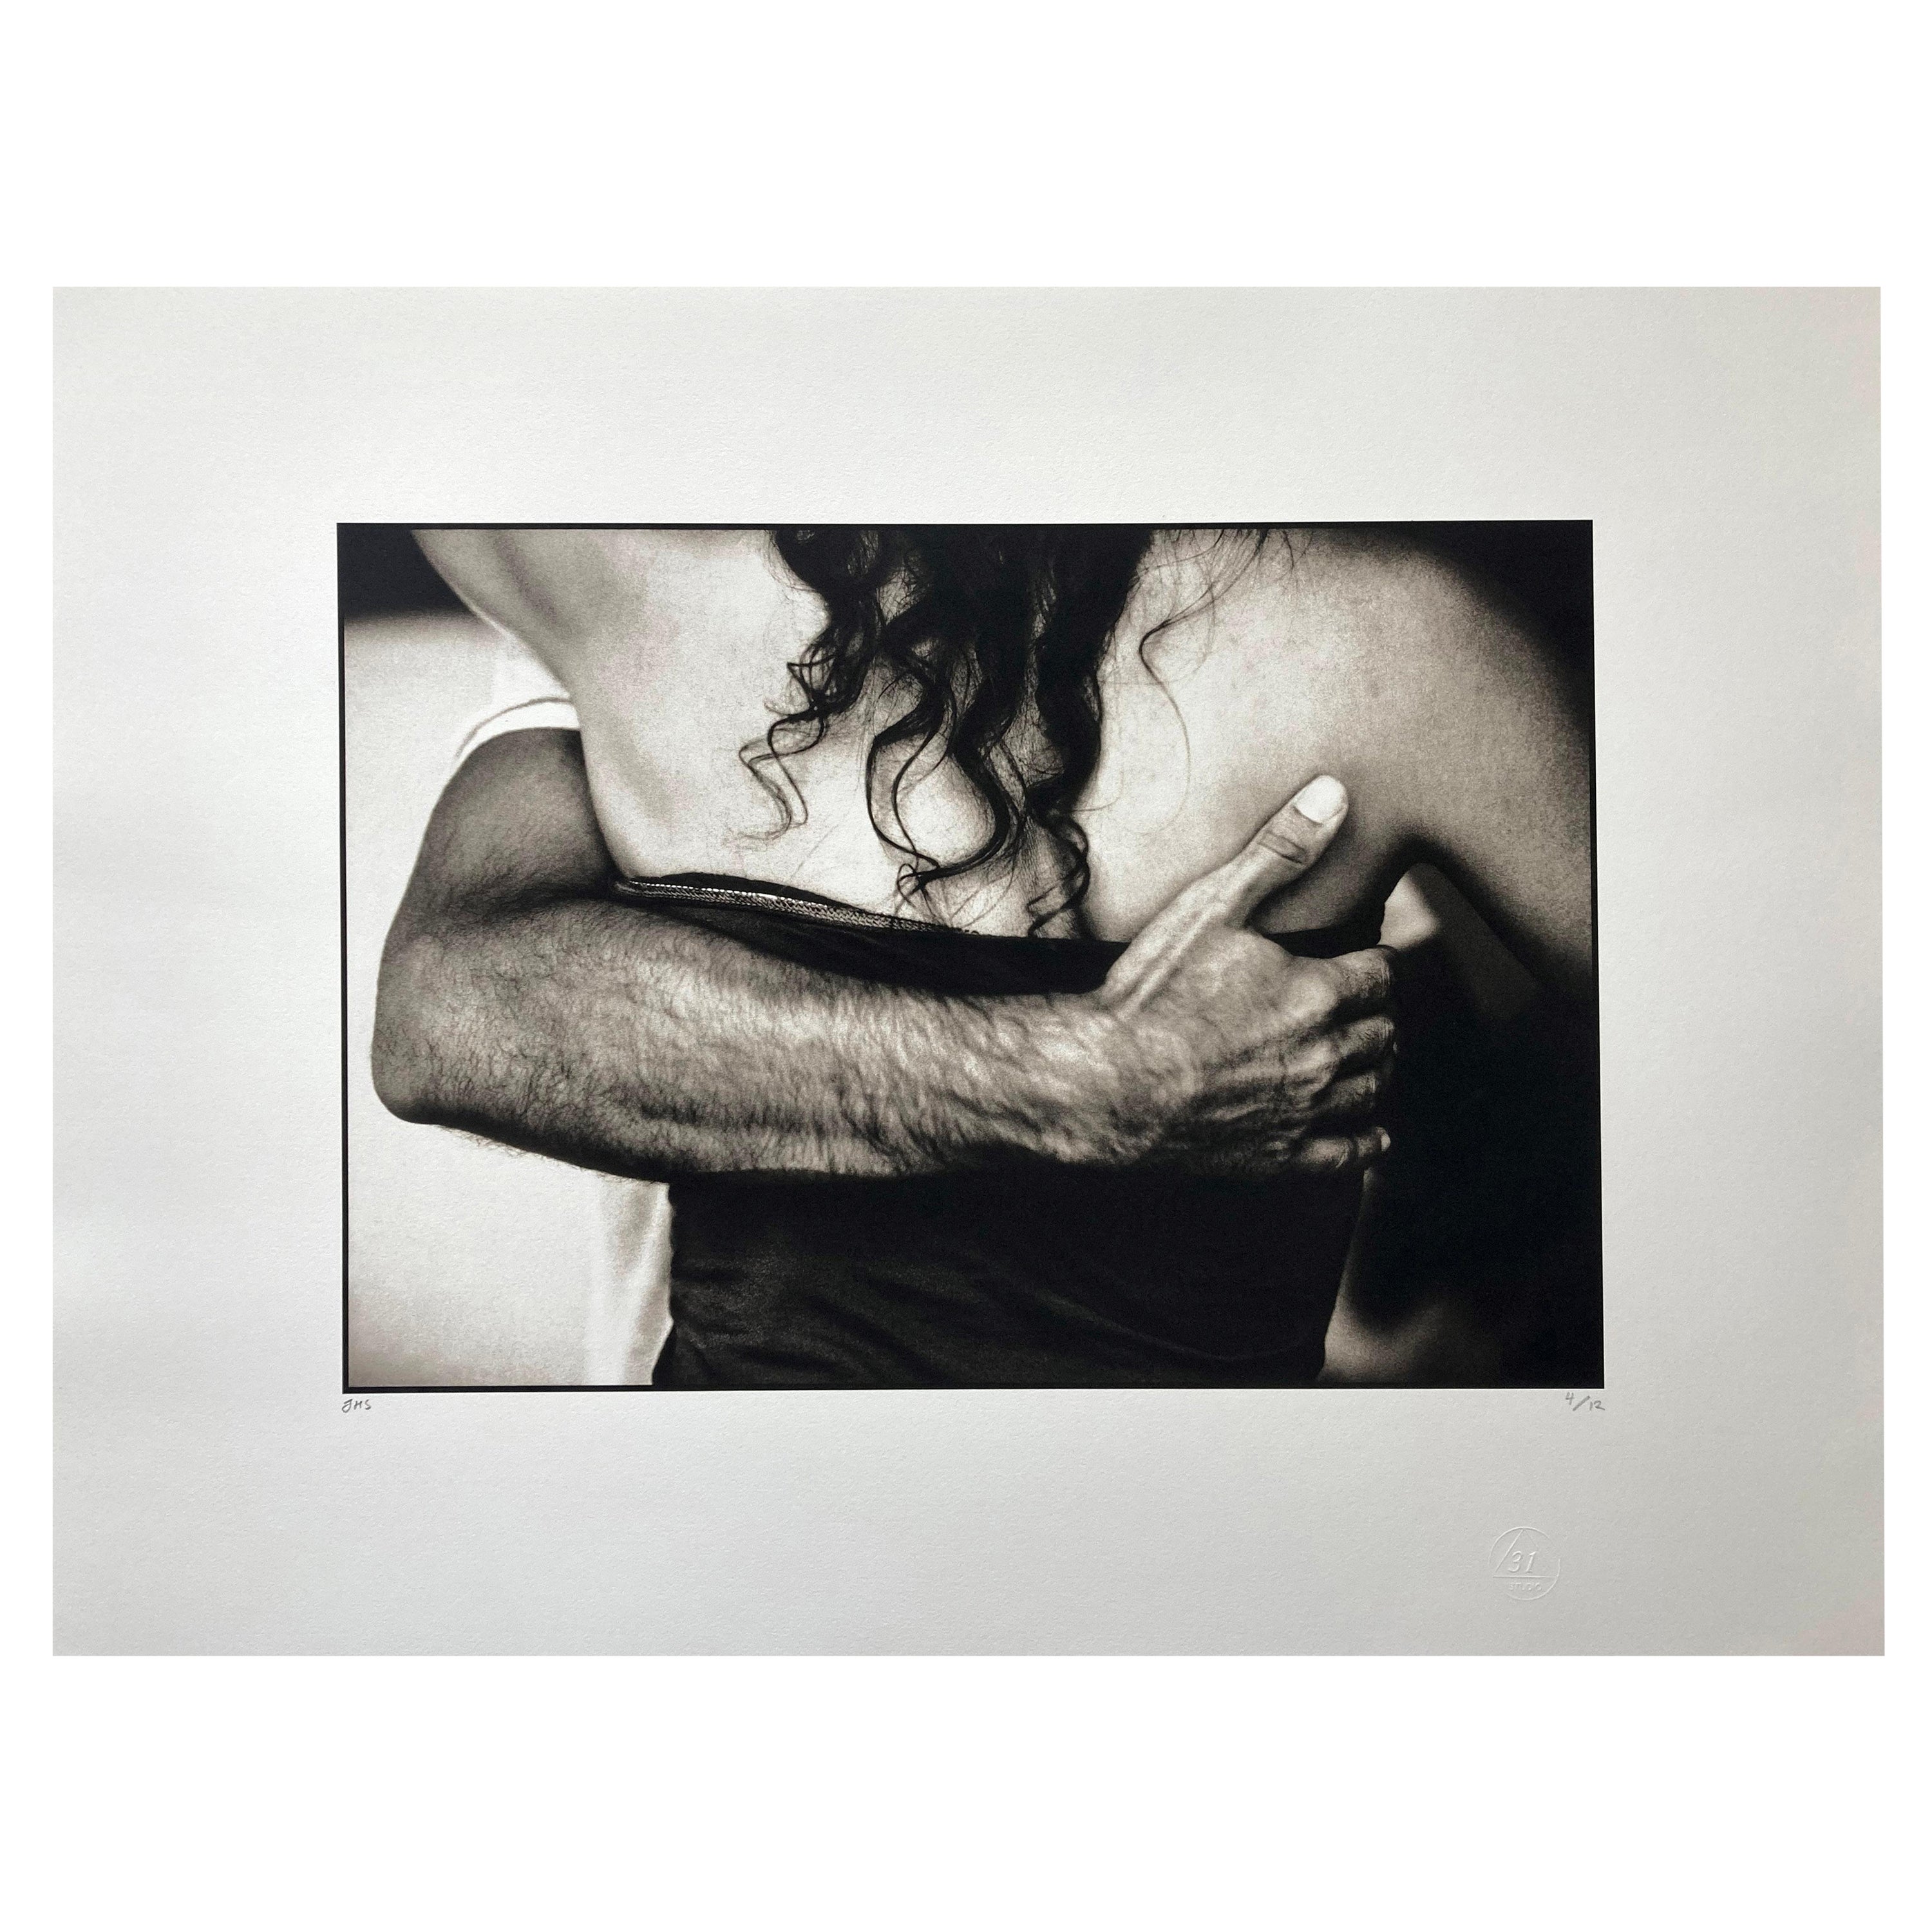 La Linea by James Sparshatt. Romantic photo of tango.  Palladium Platinum Print.

A line to be crossed… a man leads with strength and tenderness on the tango floor in Buenos Aires.

James Sparshatt’s photographs of music and dance capture the